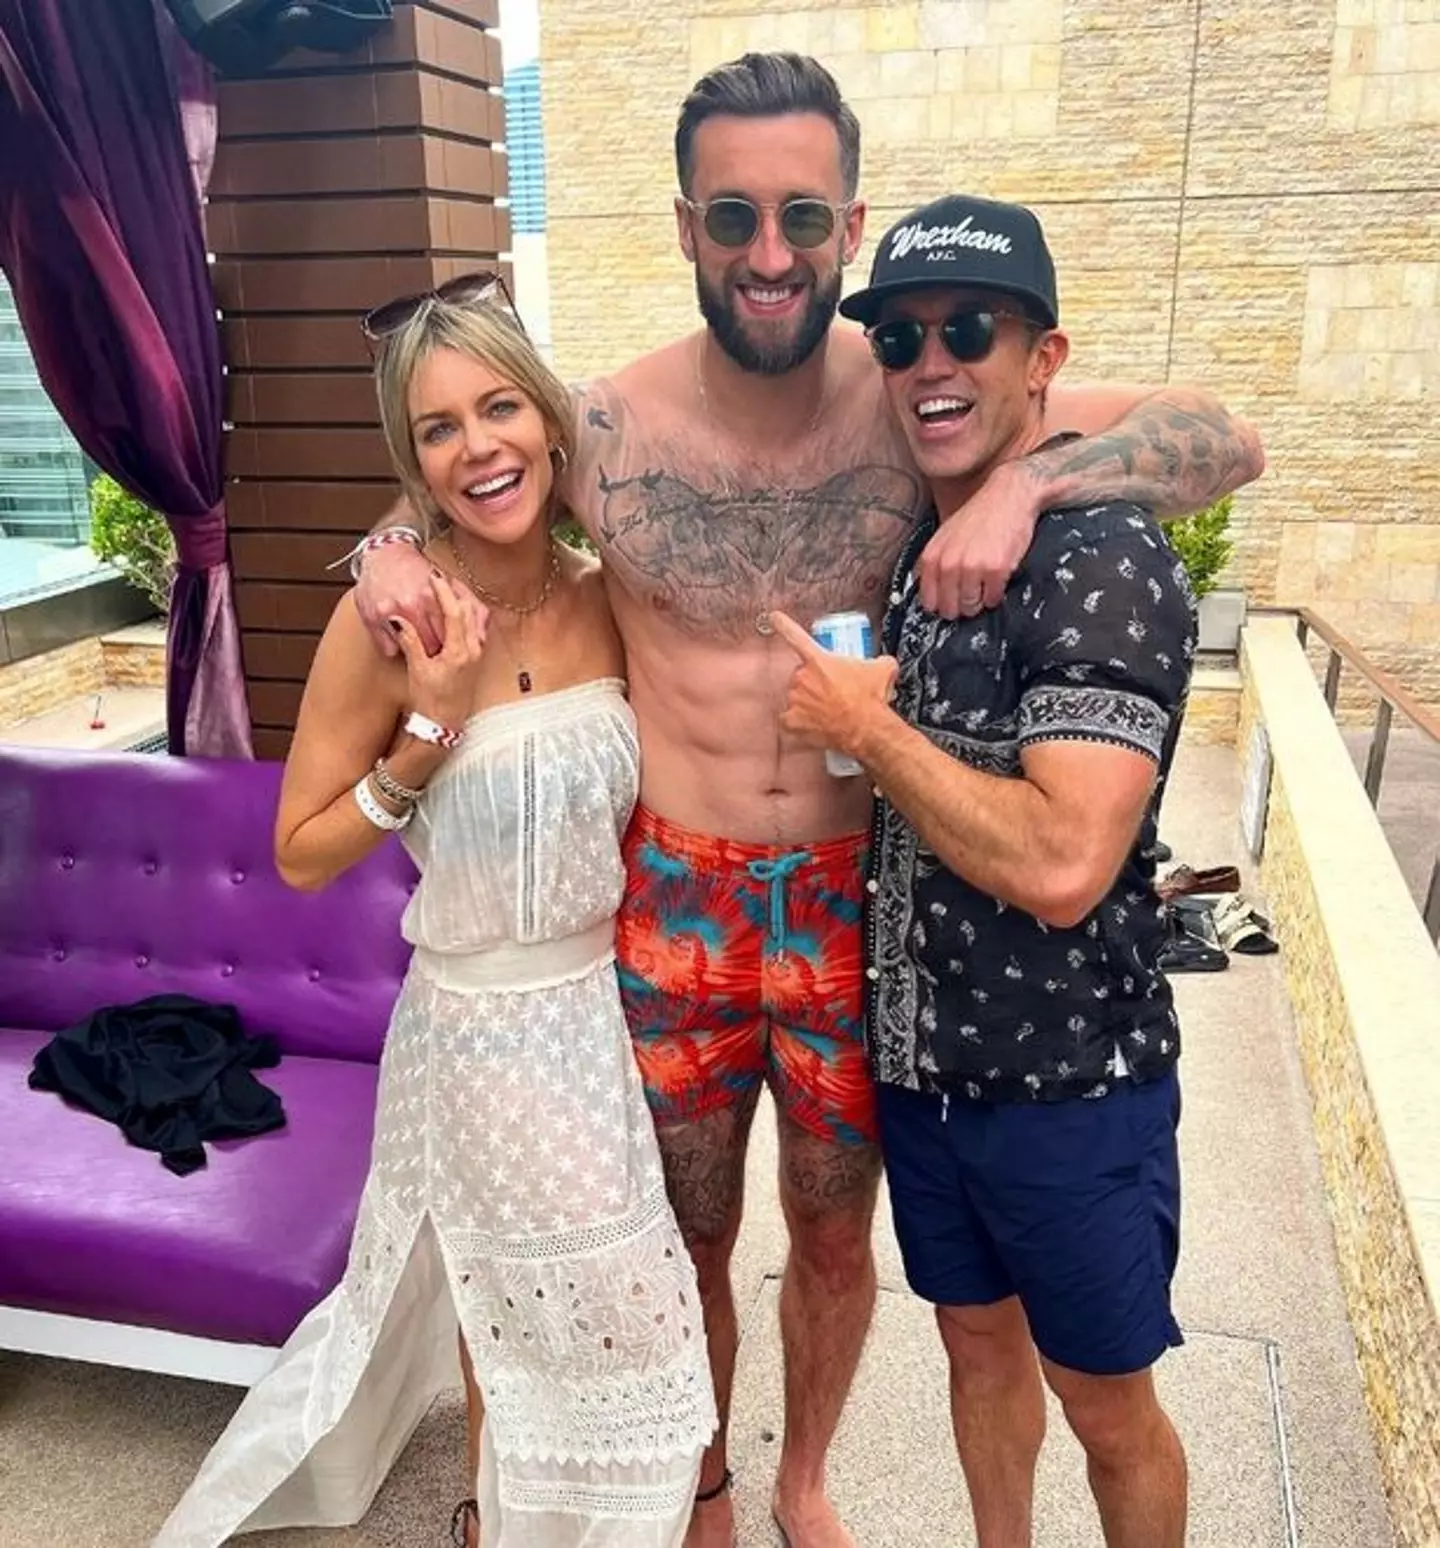 Ollie Palmer's been shirtless around Rob McElhenney and his wife Kaitlin Olson too.